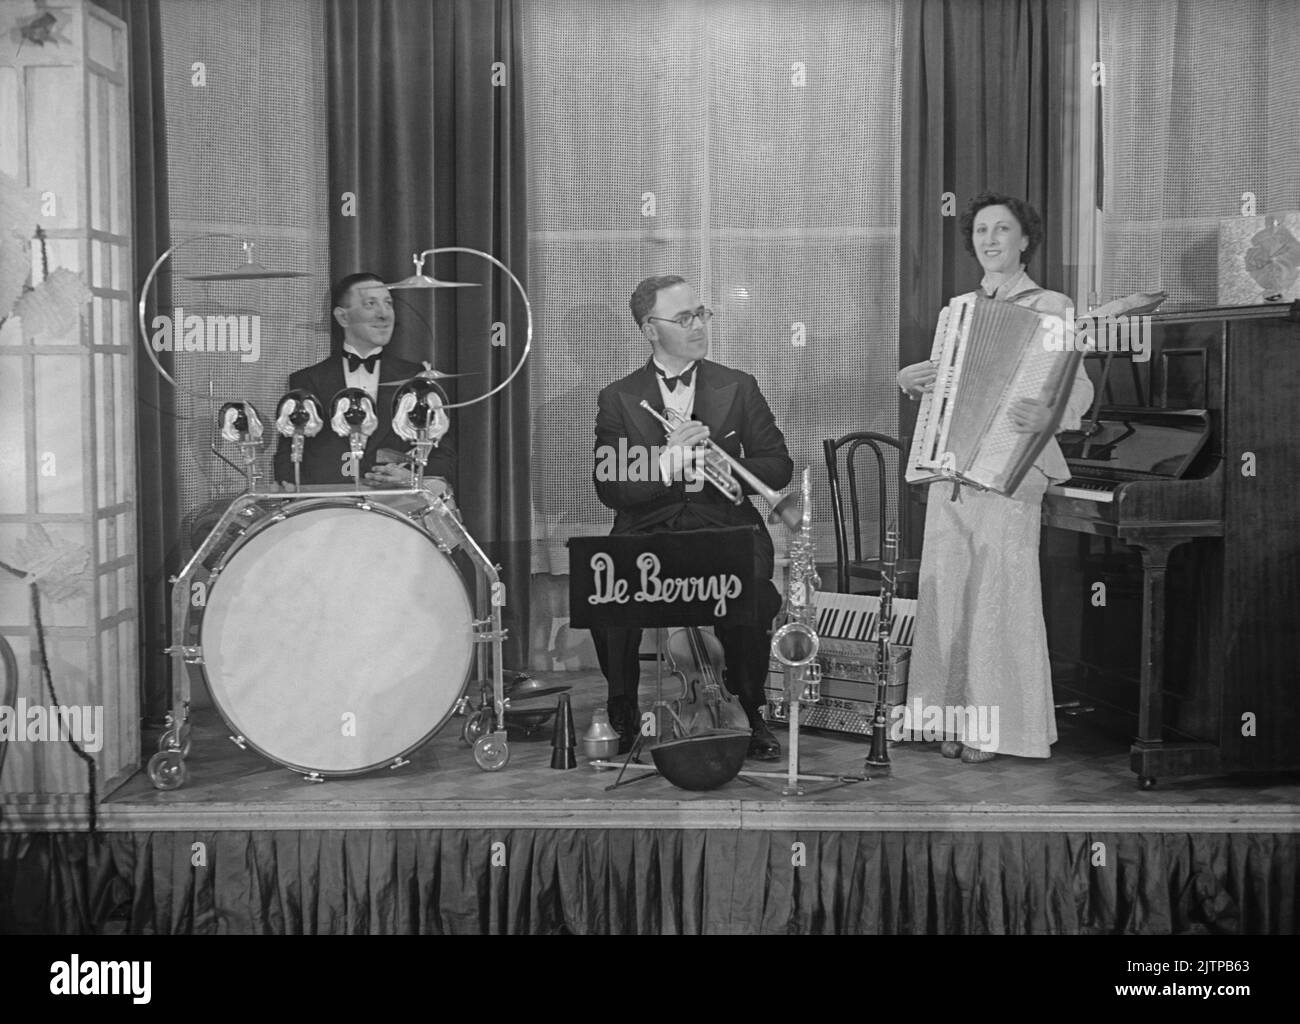 A British dance band, the De Berrys Trio, onstage at the Whitehall Court Hotel, London, England, UK in December 1937. Early dance and swing bands had their heyday in the UK during the 1920s–30s. Bands played in dance halls and hotel ballrooms. They played melodic, good-time music and individual players would play in several bands. This image is from an old glass negative – a vintage 1930s photograph. Stock Photo